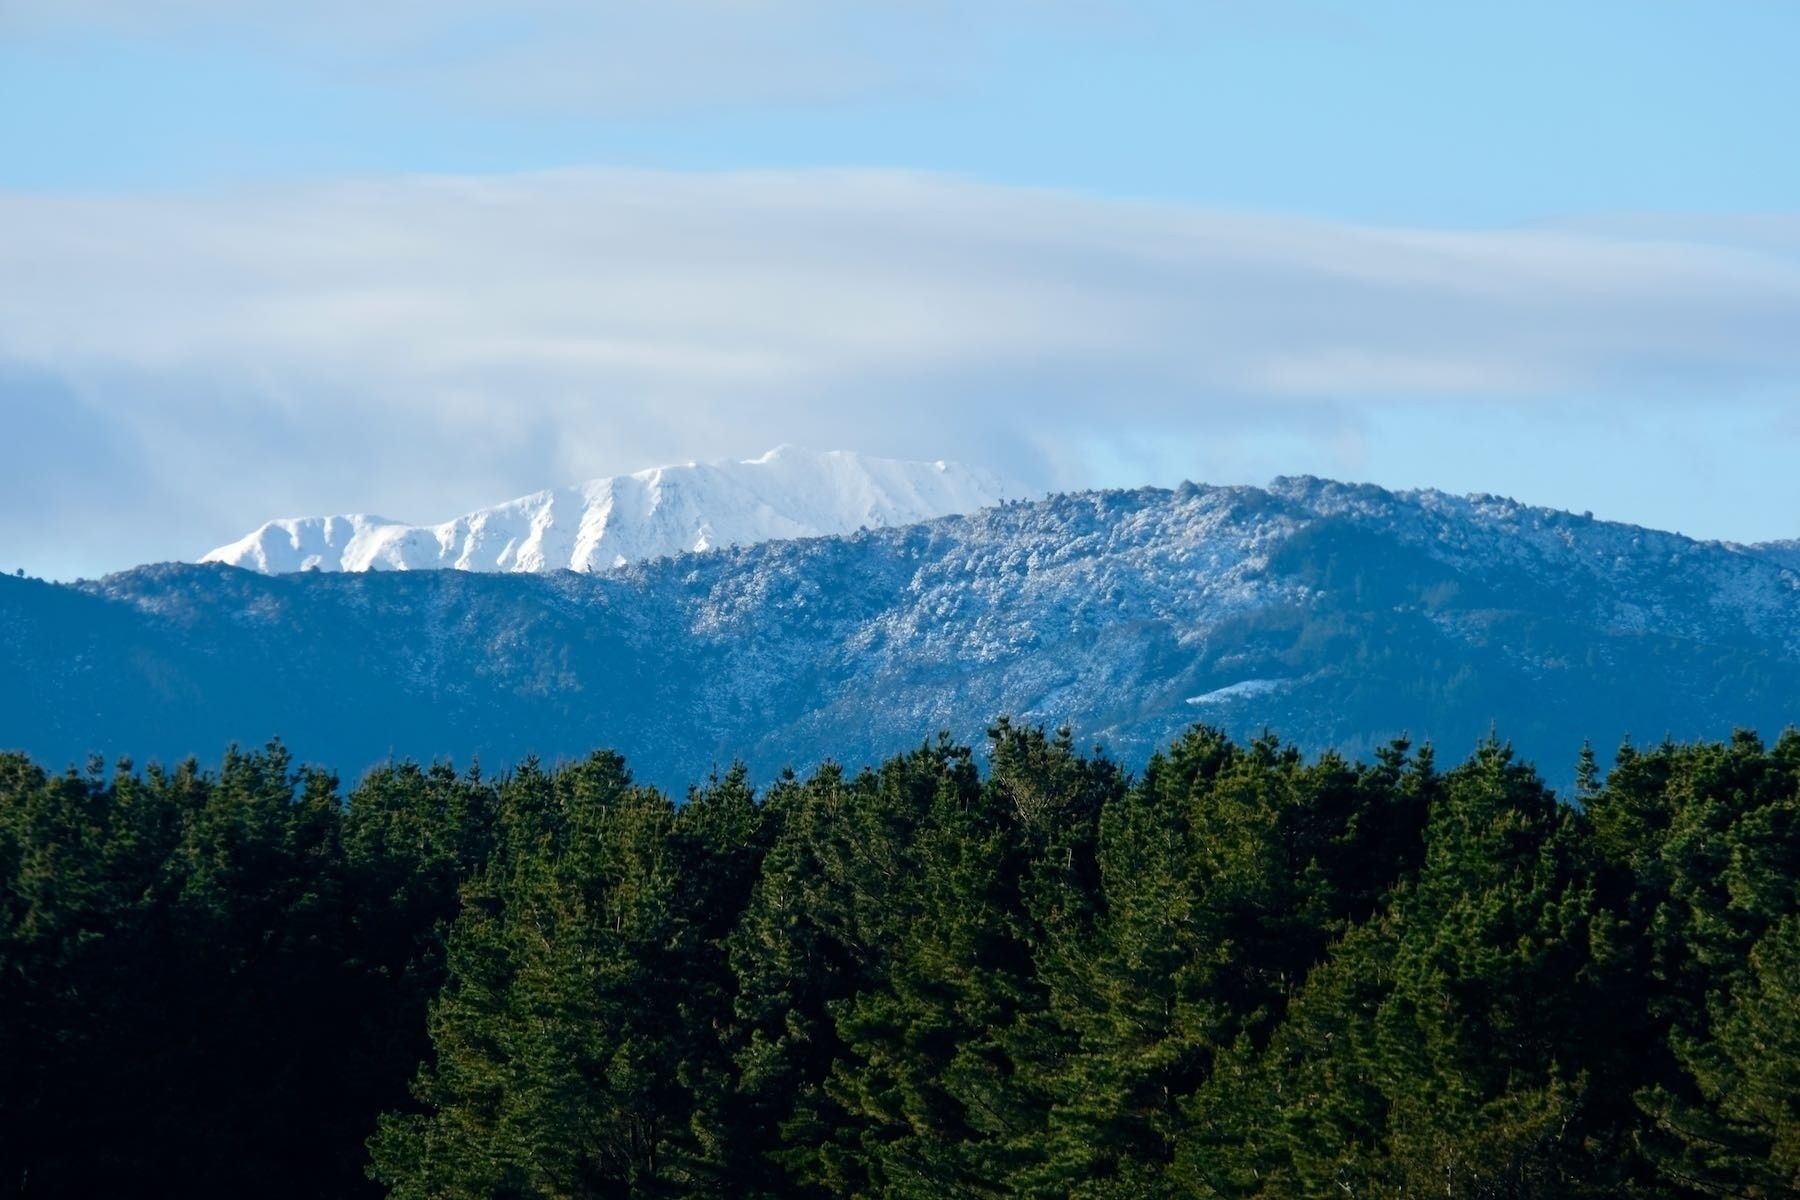 Snowy peak and foothills above trees. 